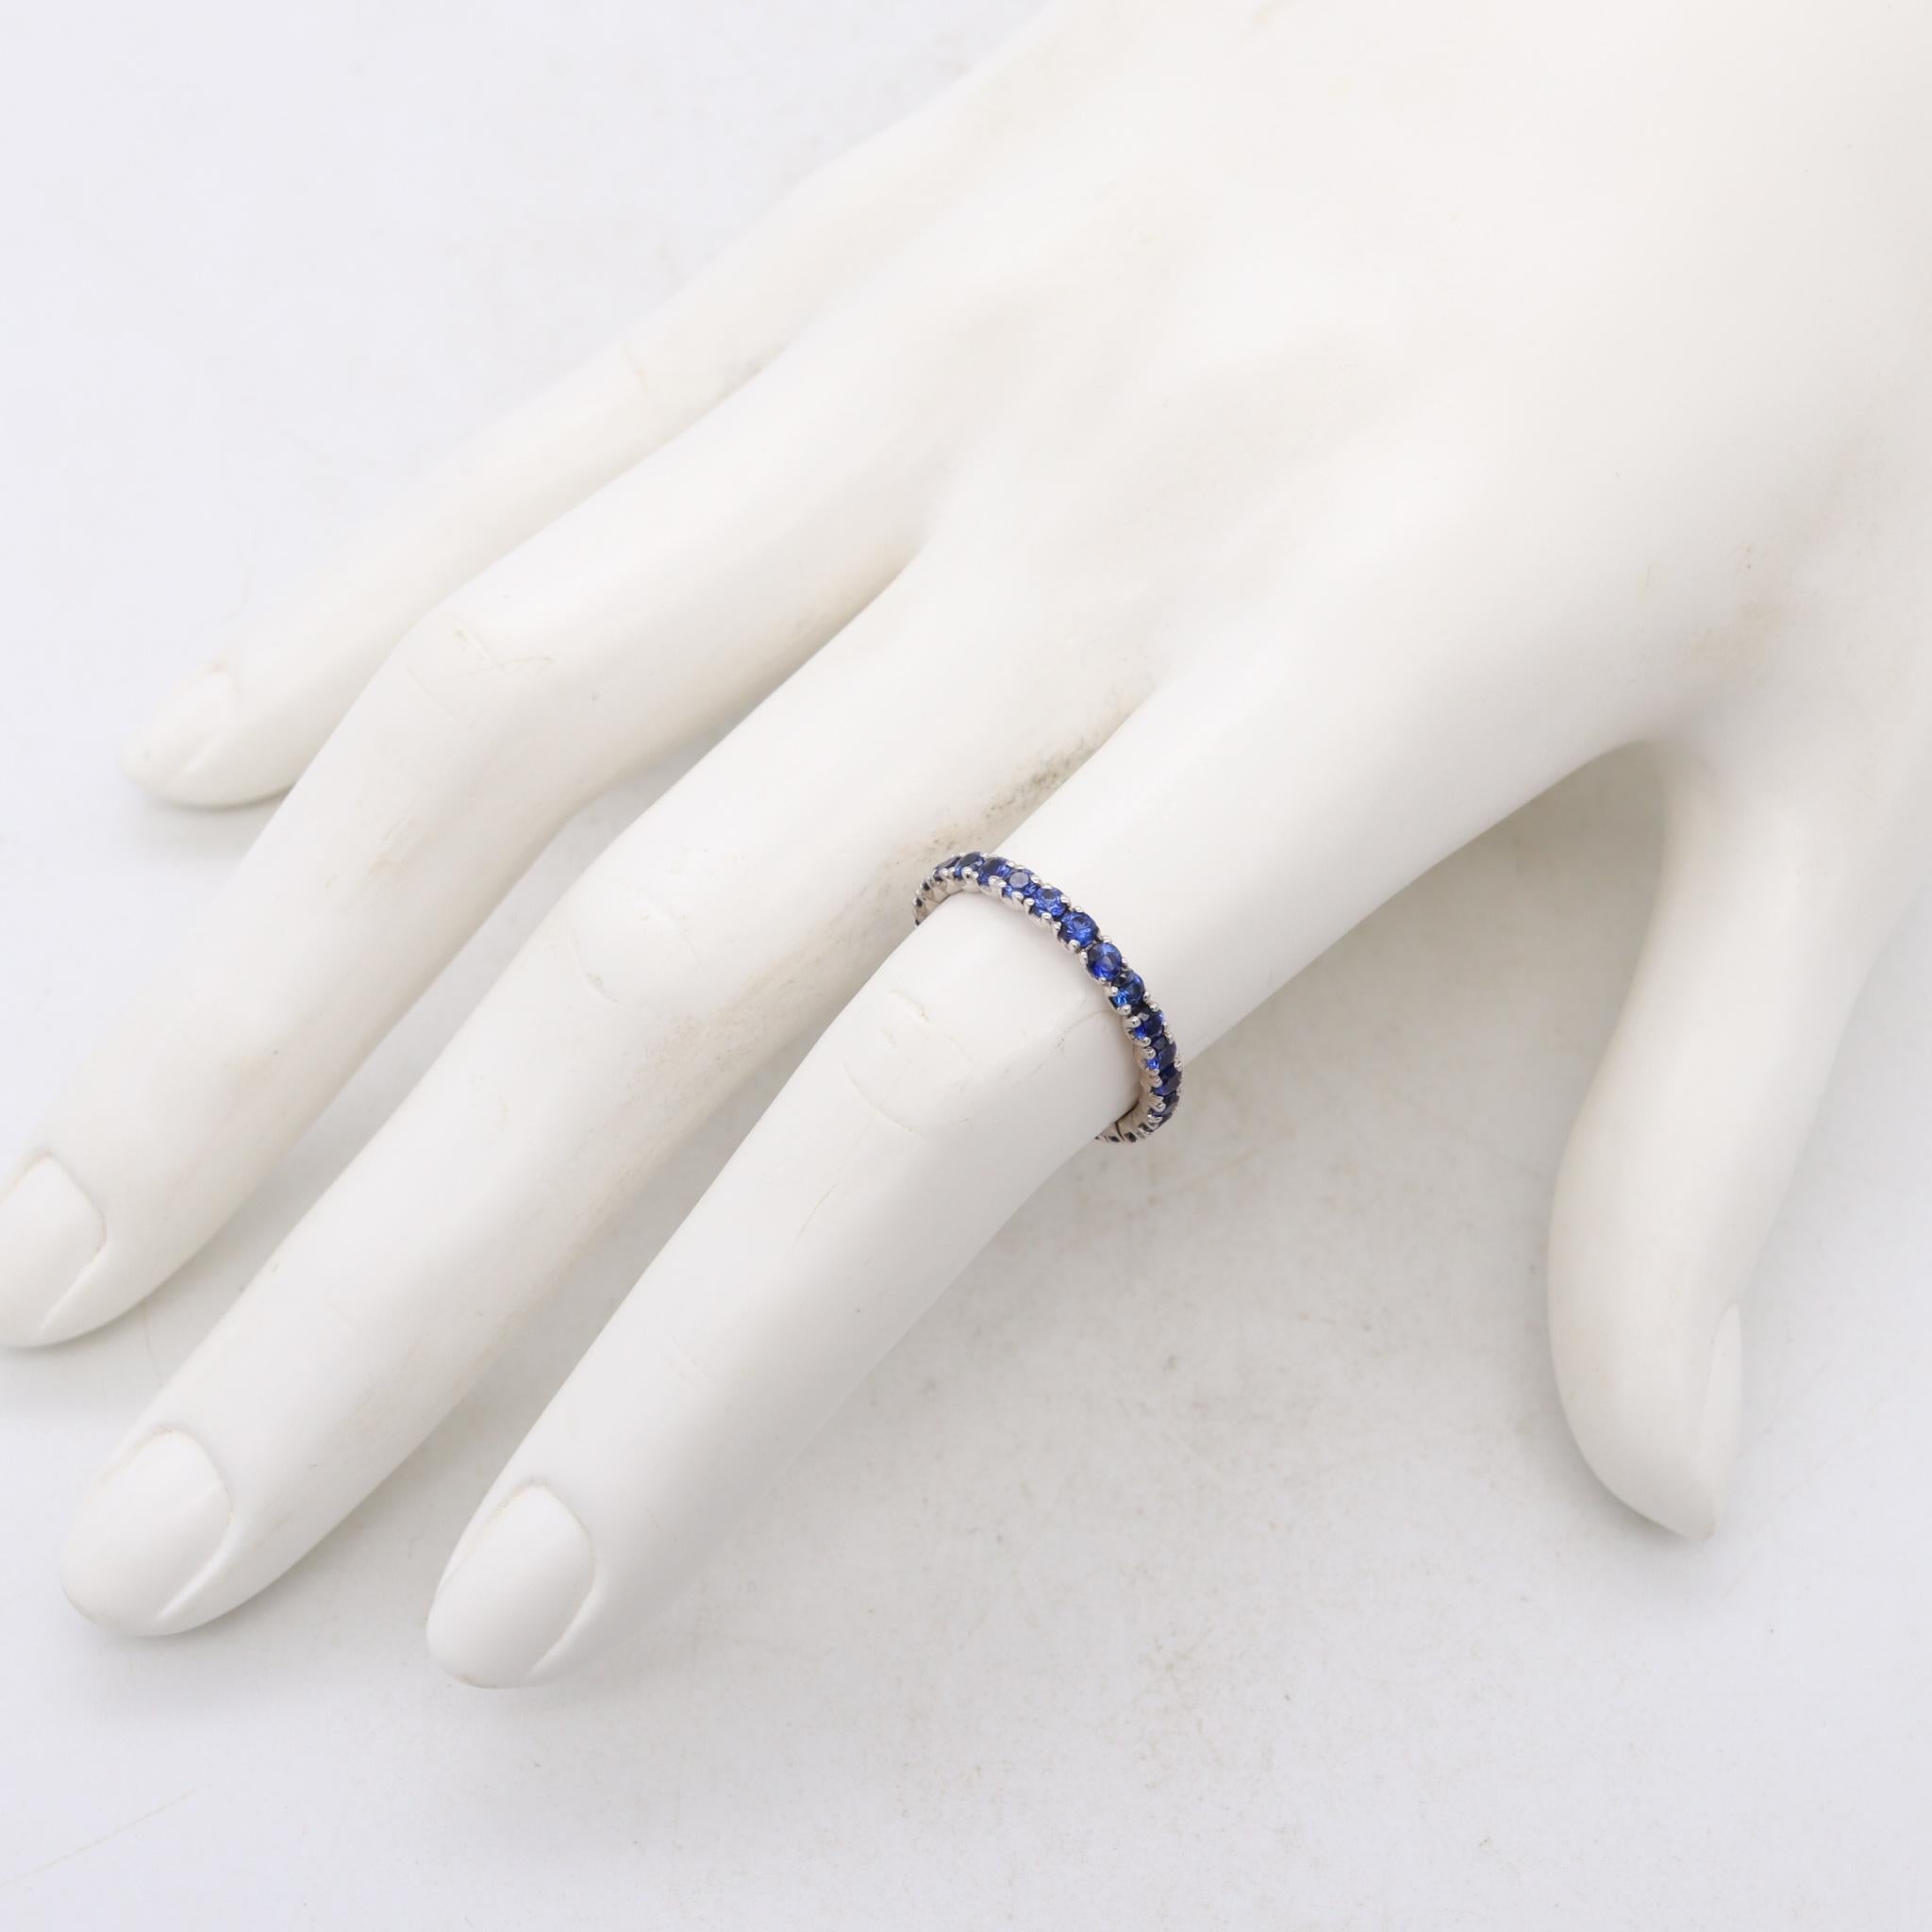 Modern Eternity Ring Band in 18kt White Gold with 1.35 Cts in Ceylon Blue Sapphires